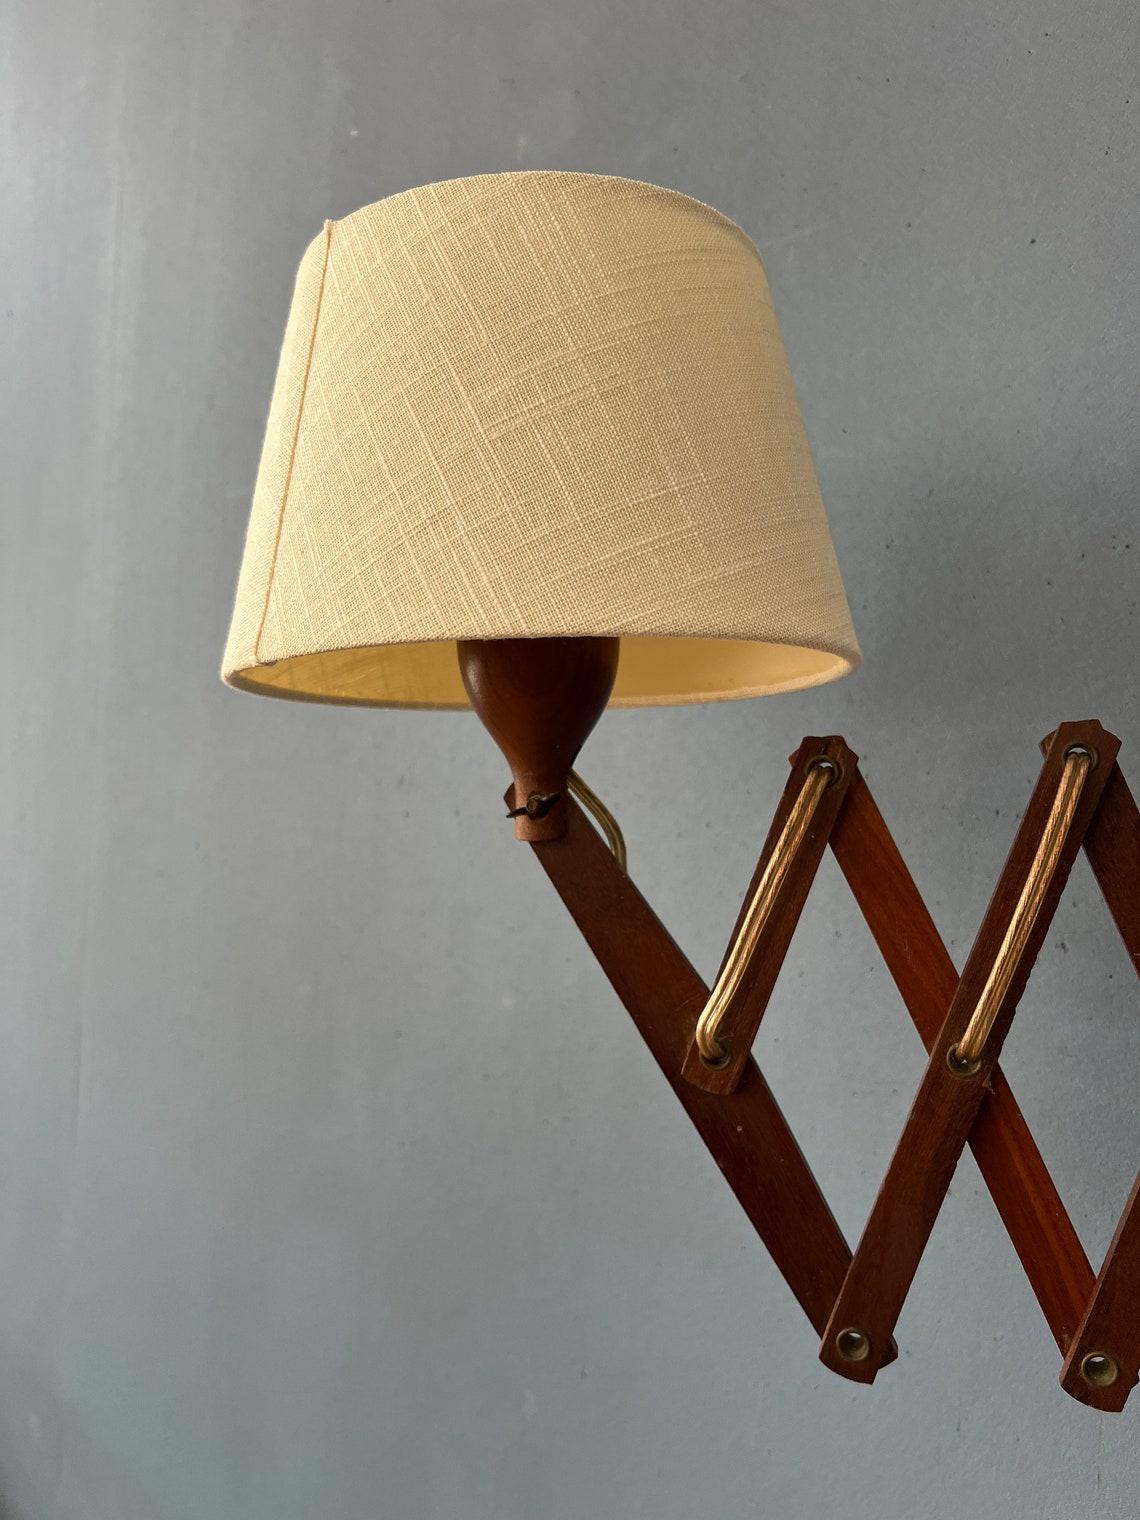 Teak Wood Scissor Wall Lamp with Beige Shade, 1970s For Sale 1